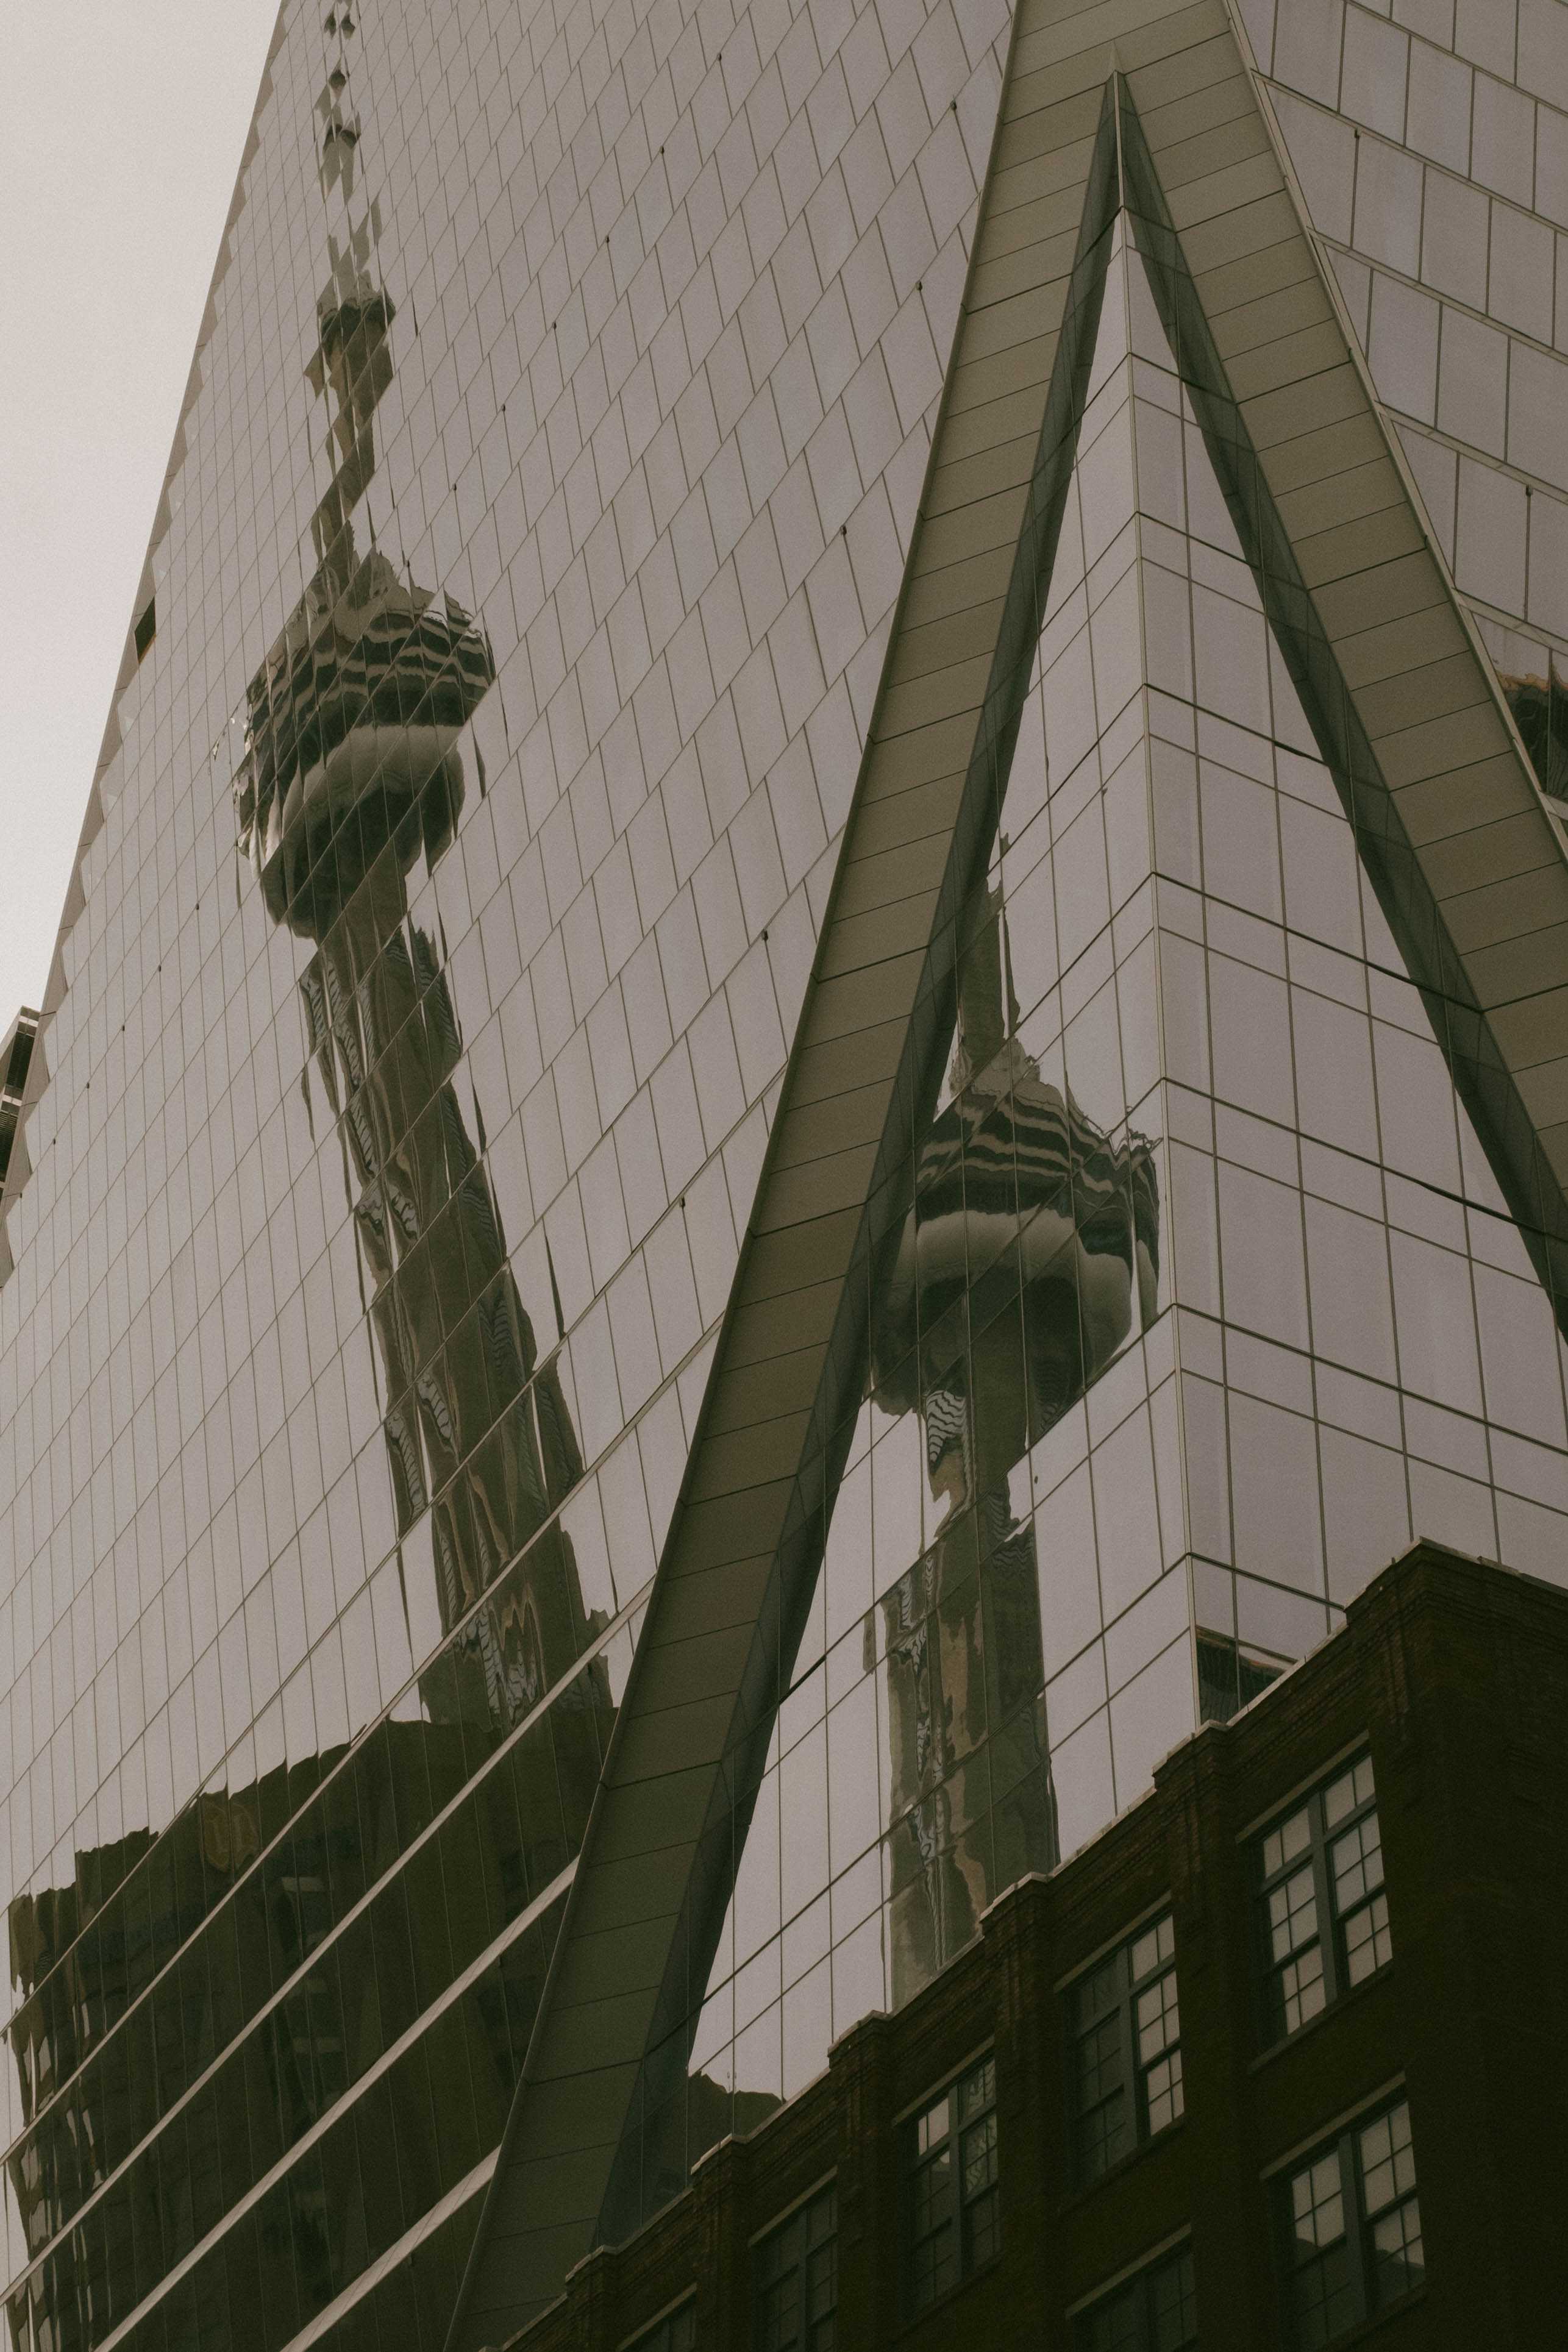 CN Tower reflected in the glass of another skyscraper